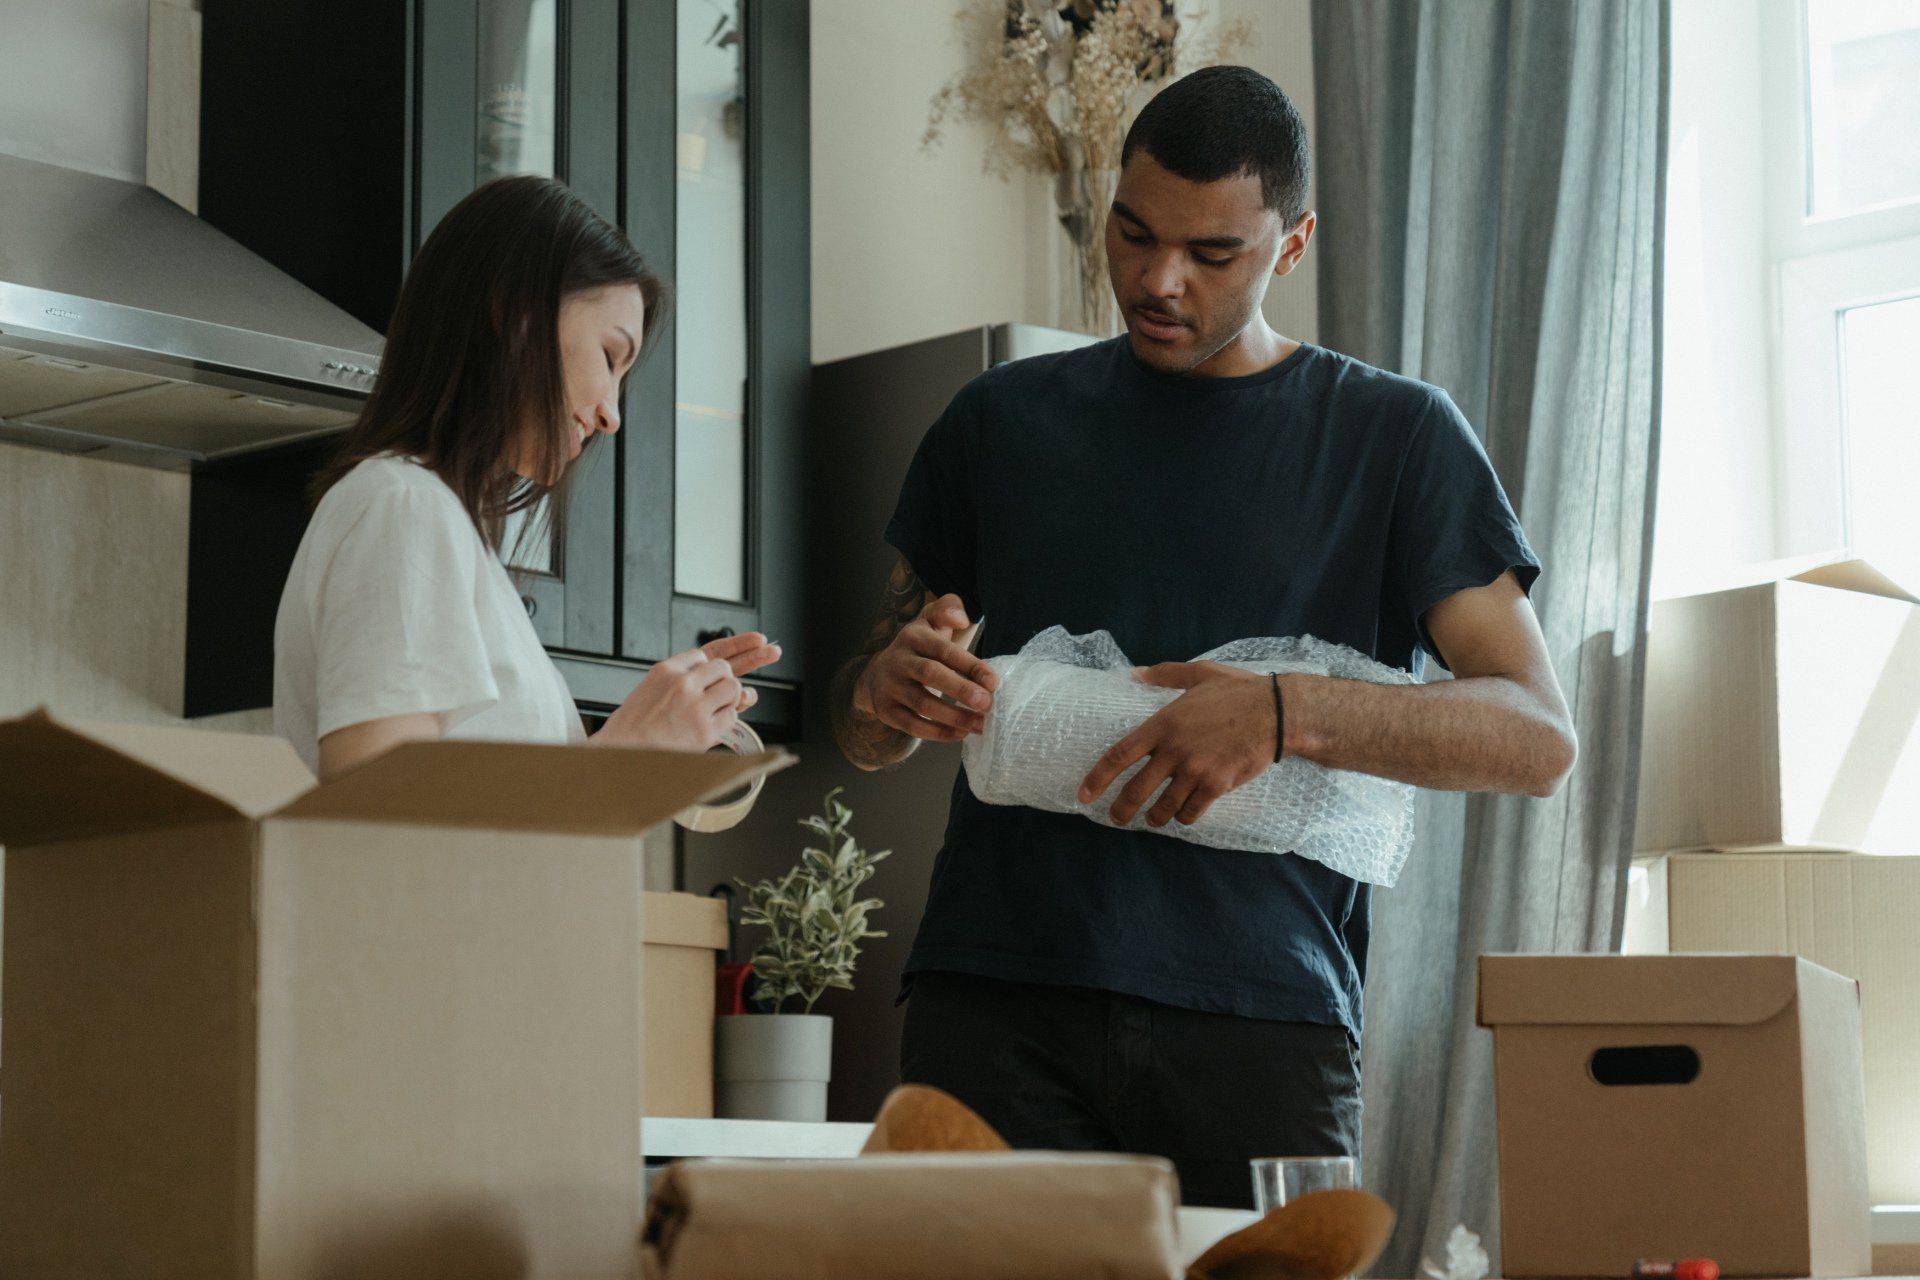 a man and a woman are packing boxes in a kitchen .